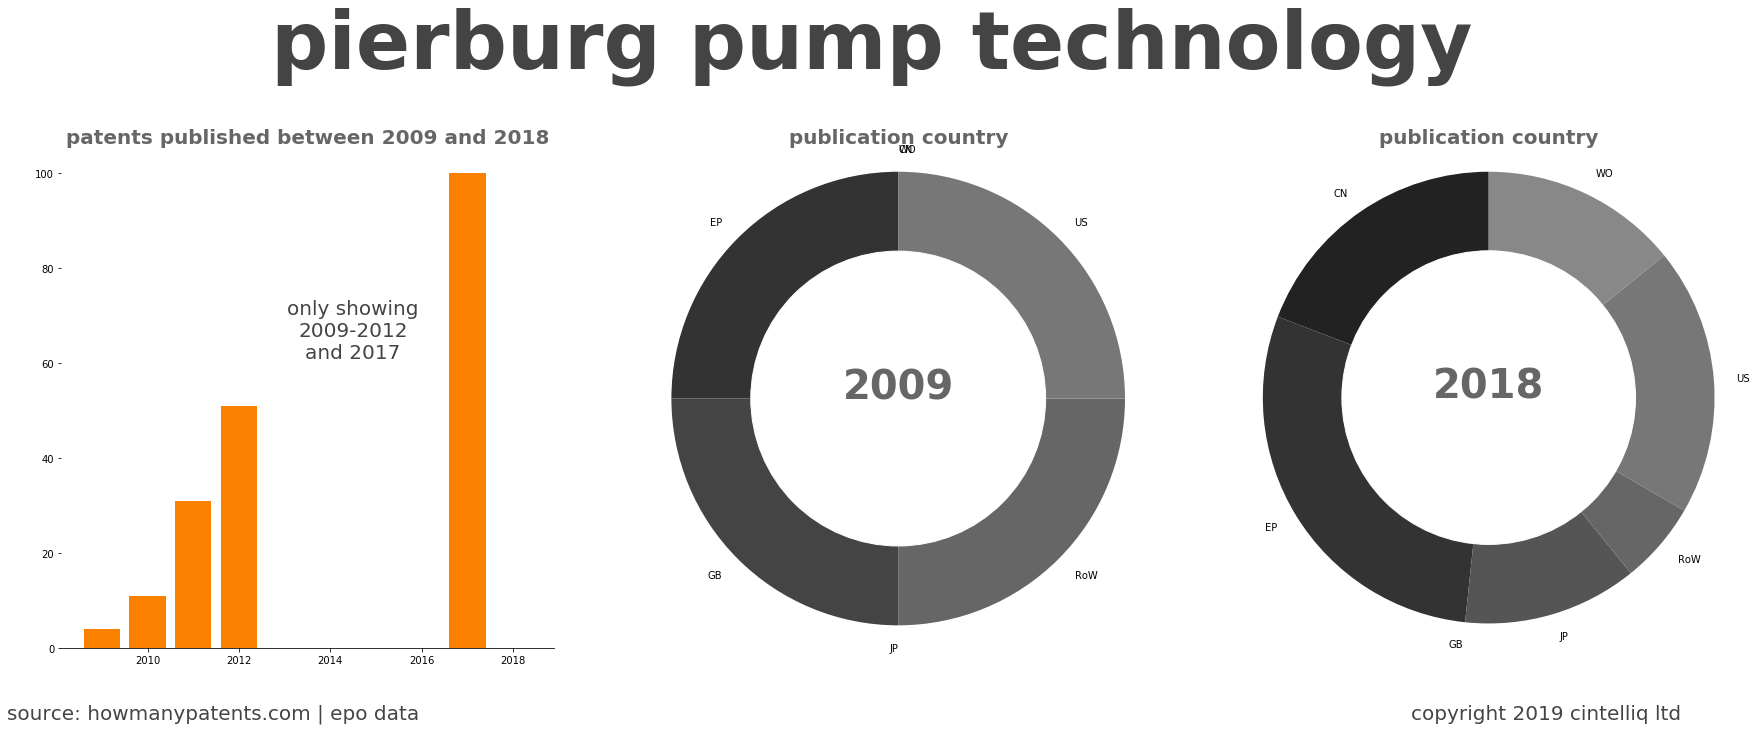 summary of patents for Pierburg Pump Technology